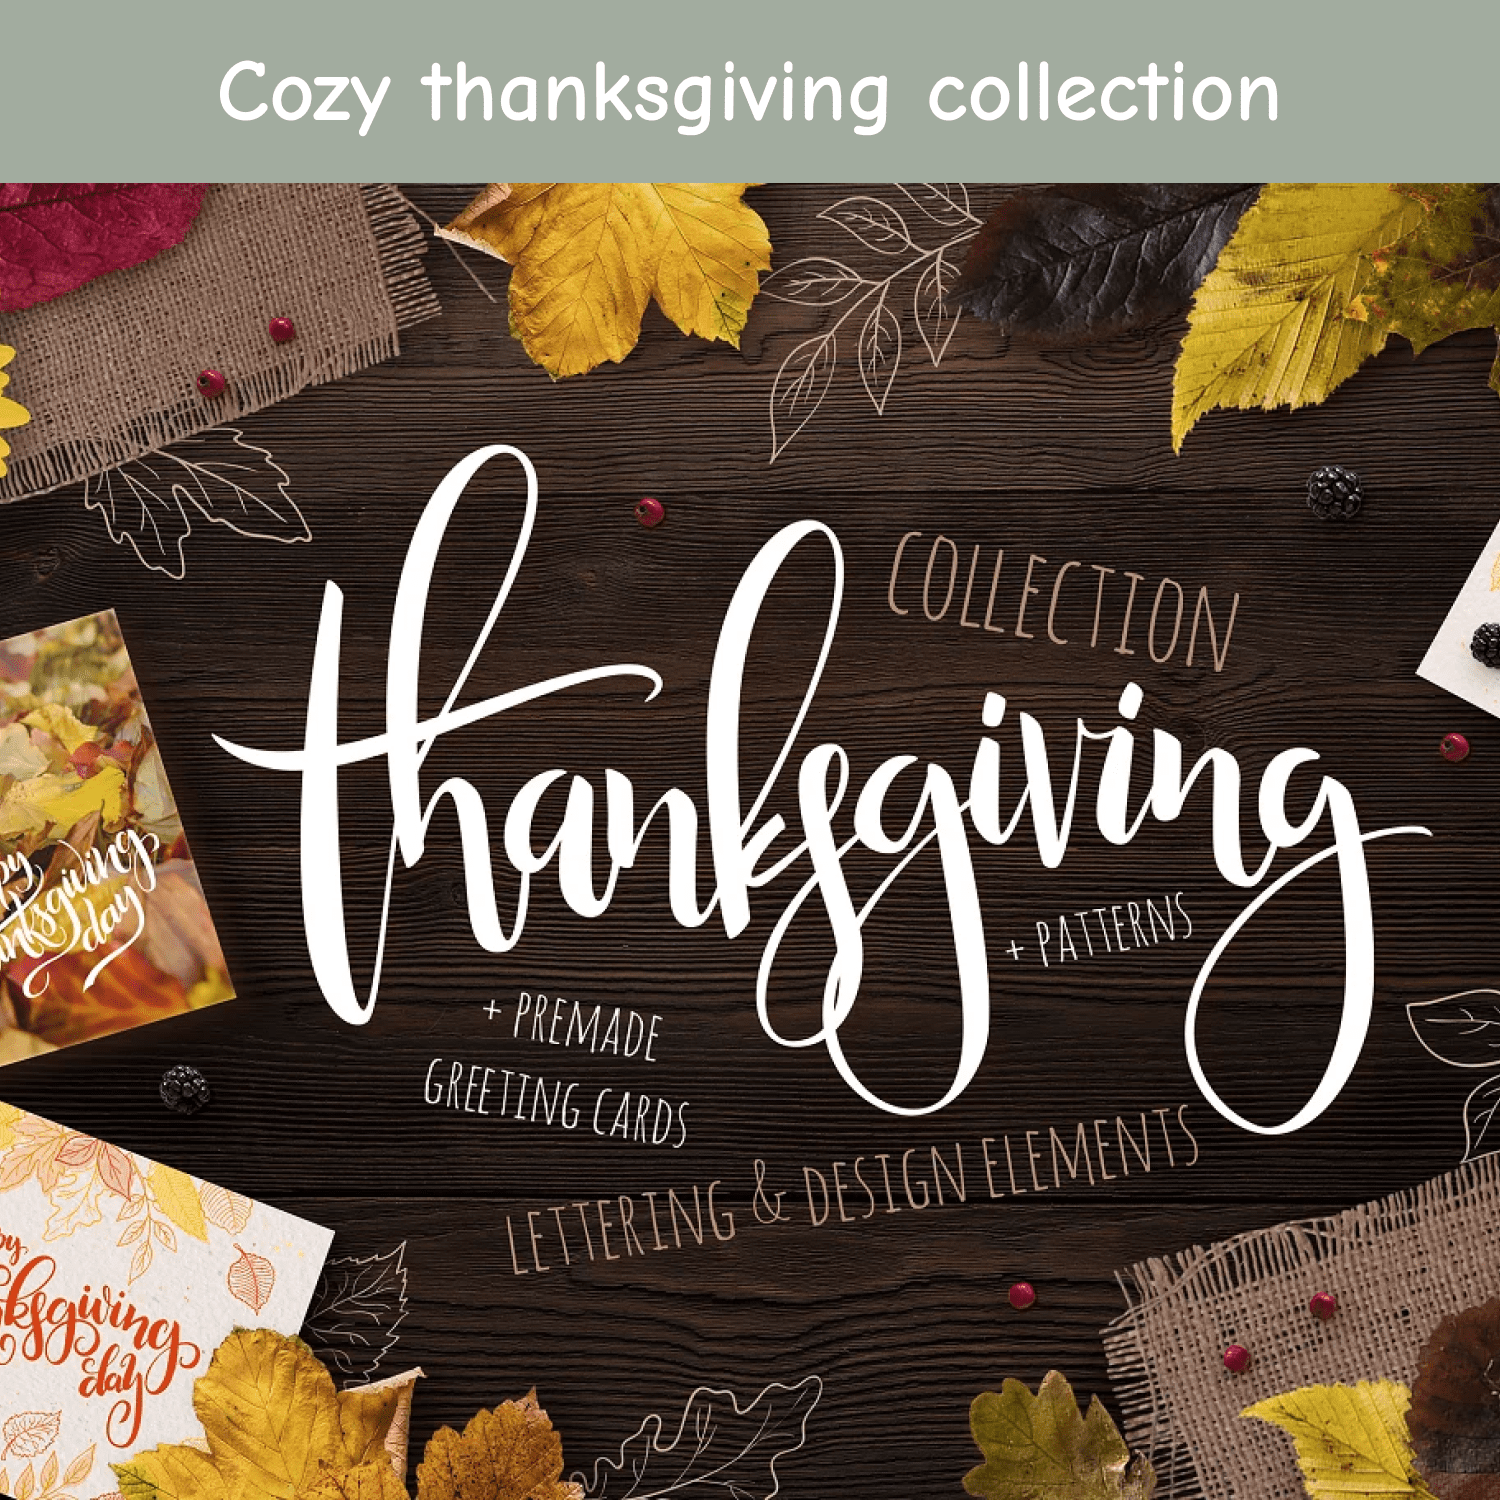 Cozy thanksgiving collection.